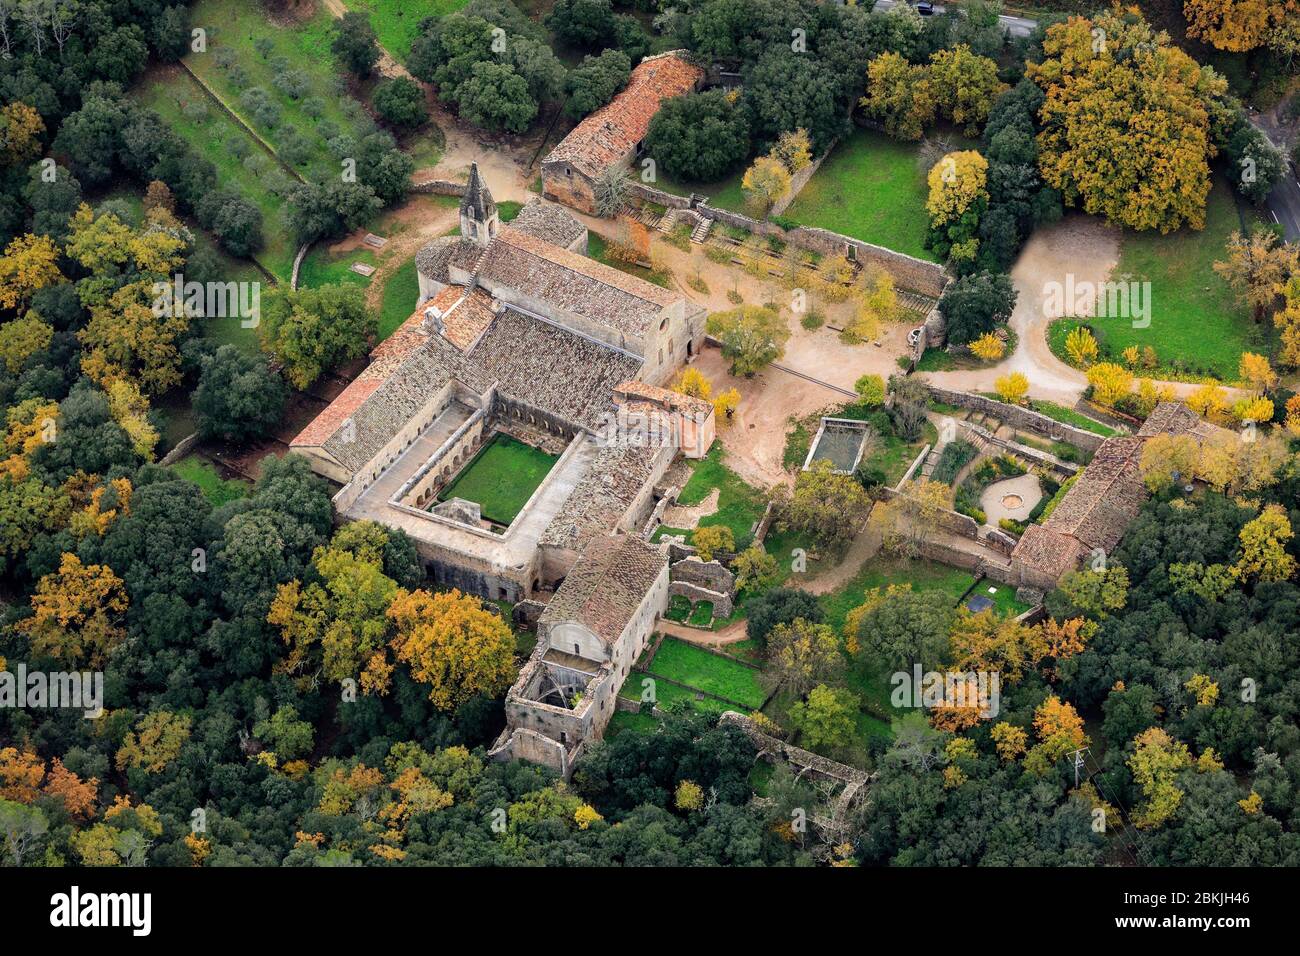 France, Var, Le Thoronet, Thoronet Abbey (12th century), listed Historic Monument (aerial view) Stock Photo